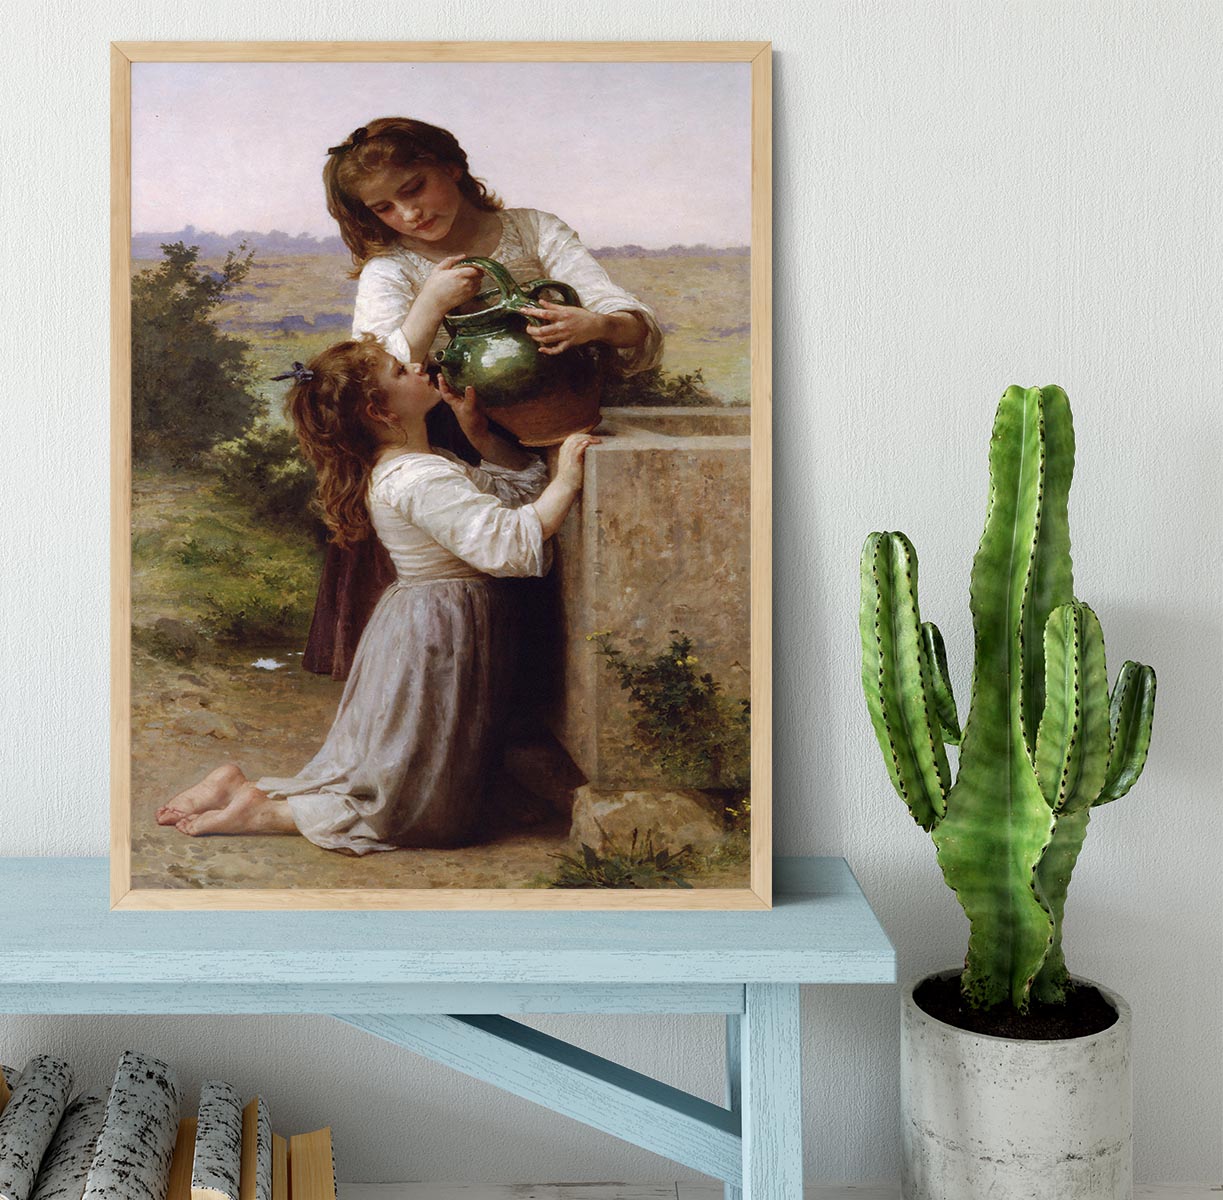 At The Fountain 2 By Bouguereau Framed Print - Canvas Art Rocks - 4